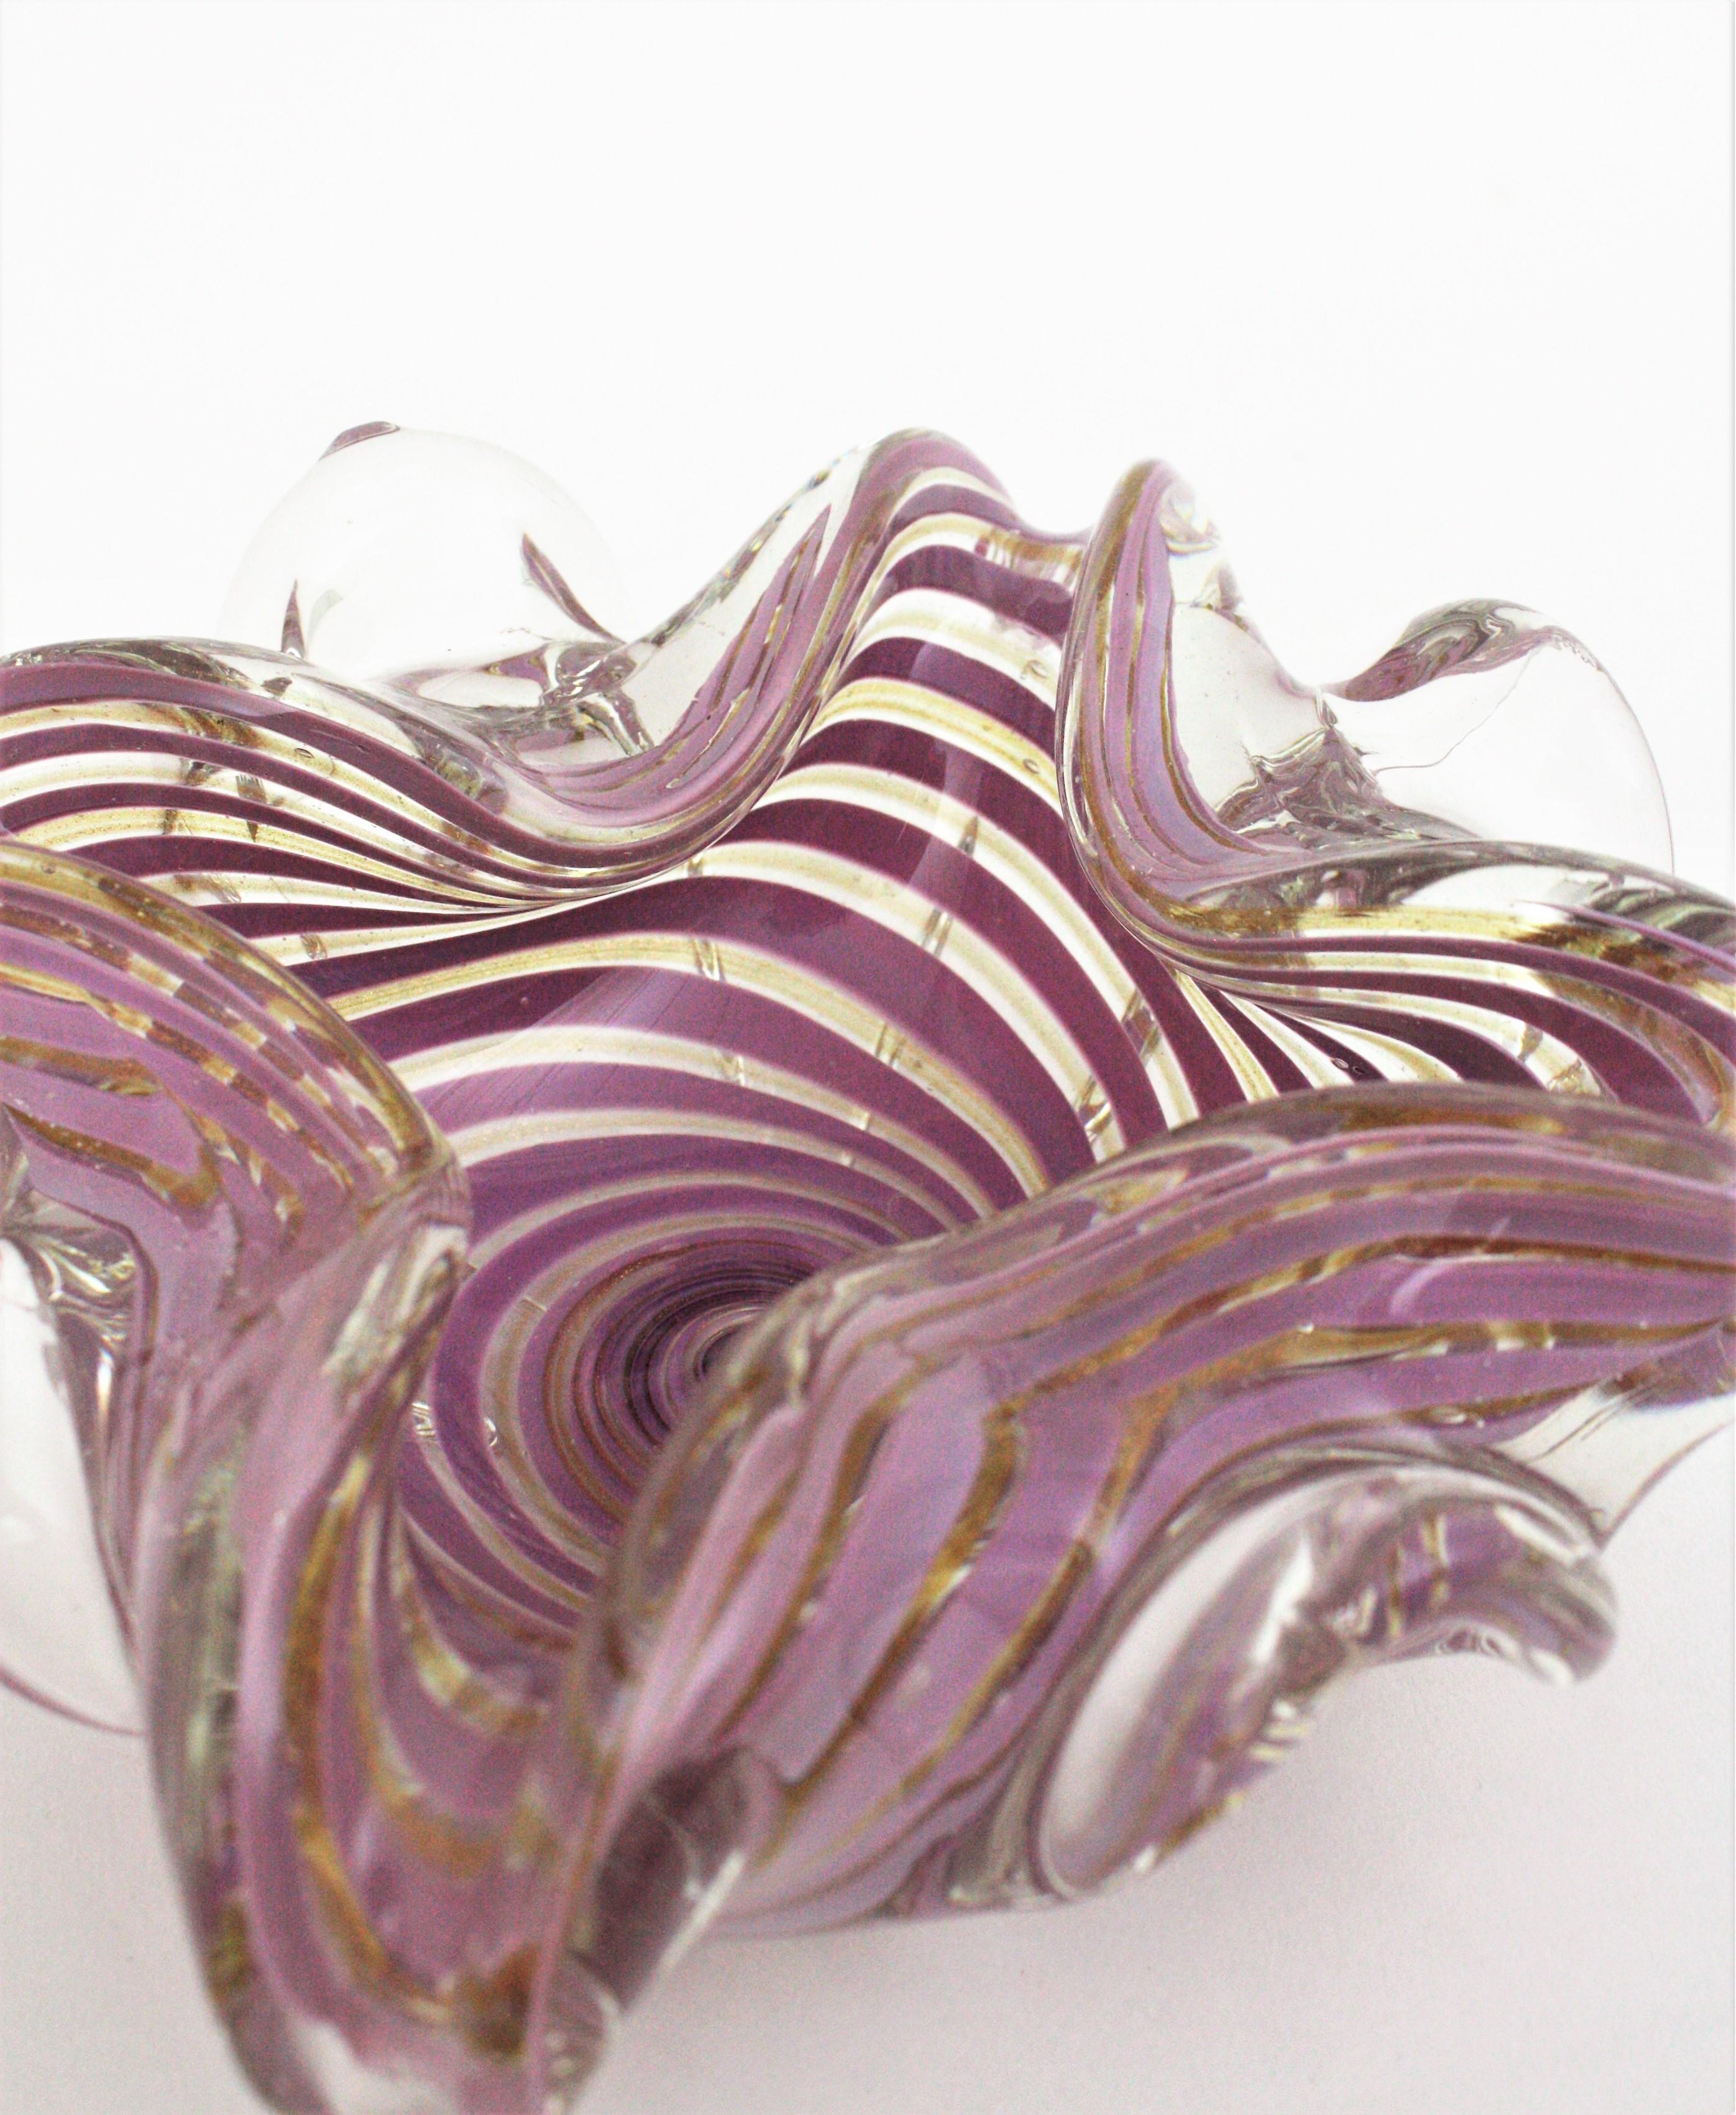 Fratelli Toso Murano Glass Lilac Swirl Ribbons & Gold Dust Large Bowl / Ashtray en vente 7